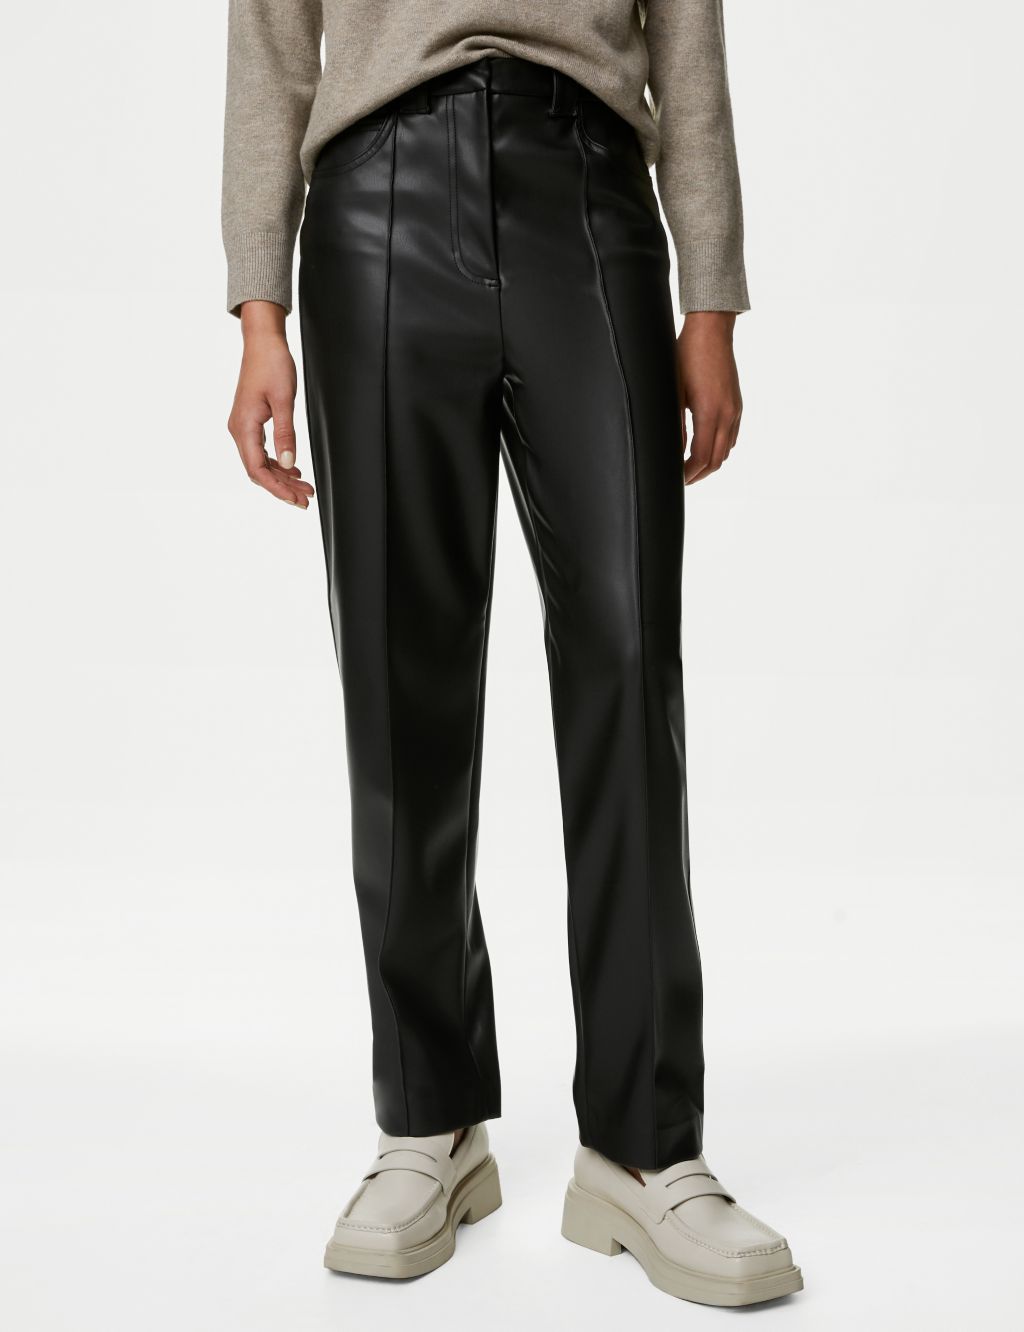 Leather Look Ankle Grazer Trousers image 3